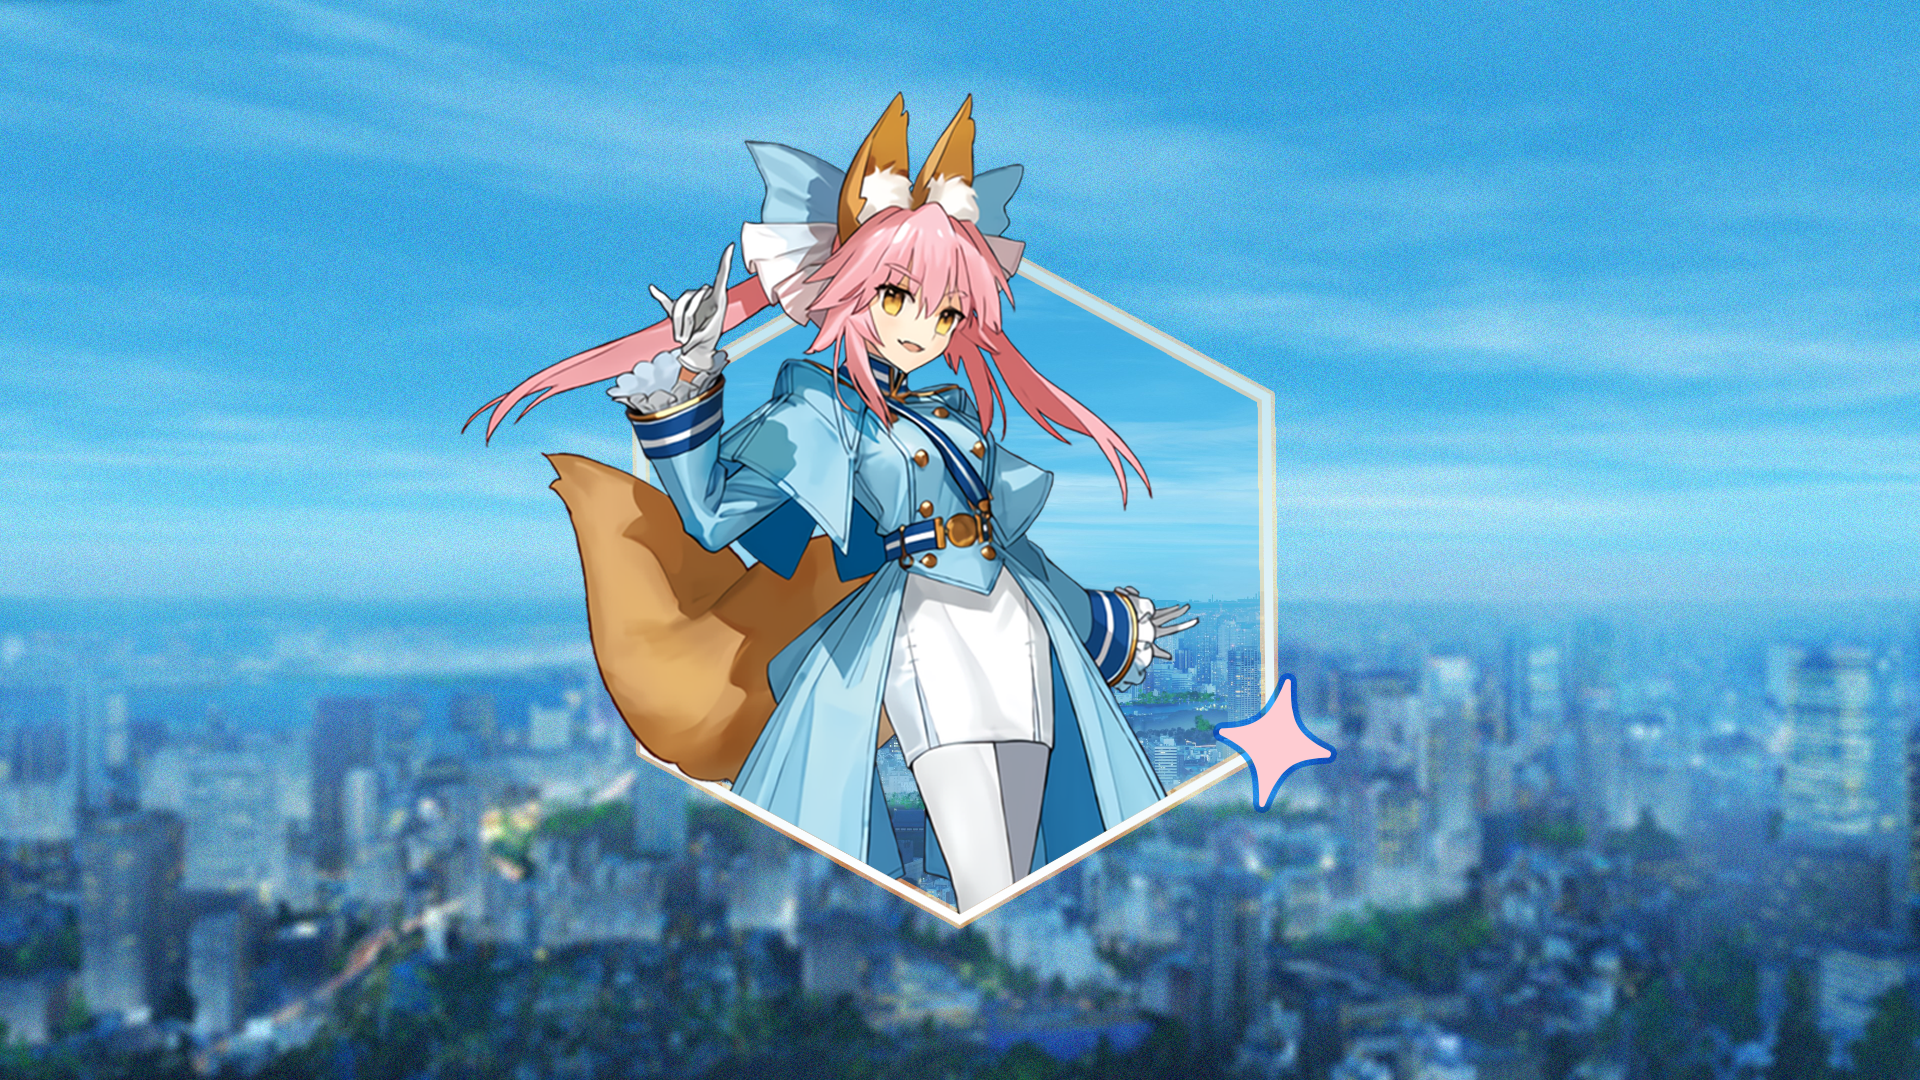 Anime 1920x1080 Fate series picture-in-picture city Fate/Extra Fate/Extra CCC anime girls Tamamo no Mae (fate/grand order) Tamamo animal ears fox girl fox ears fox tail